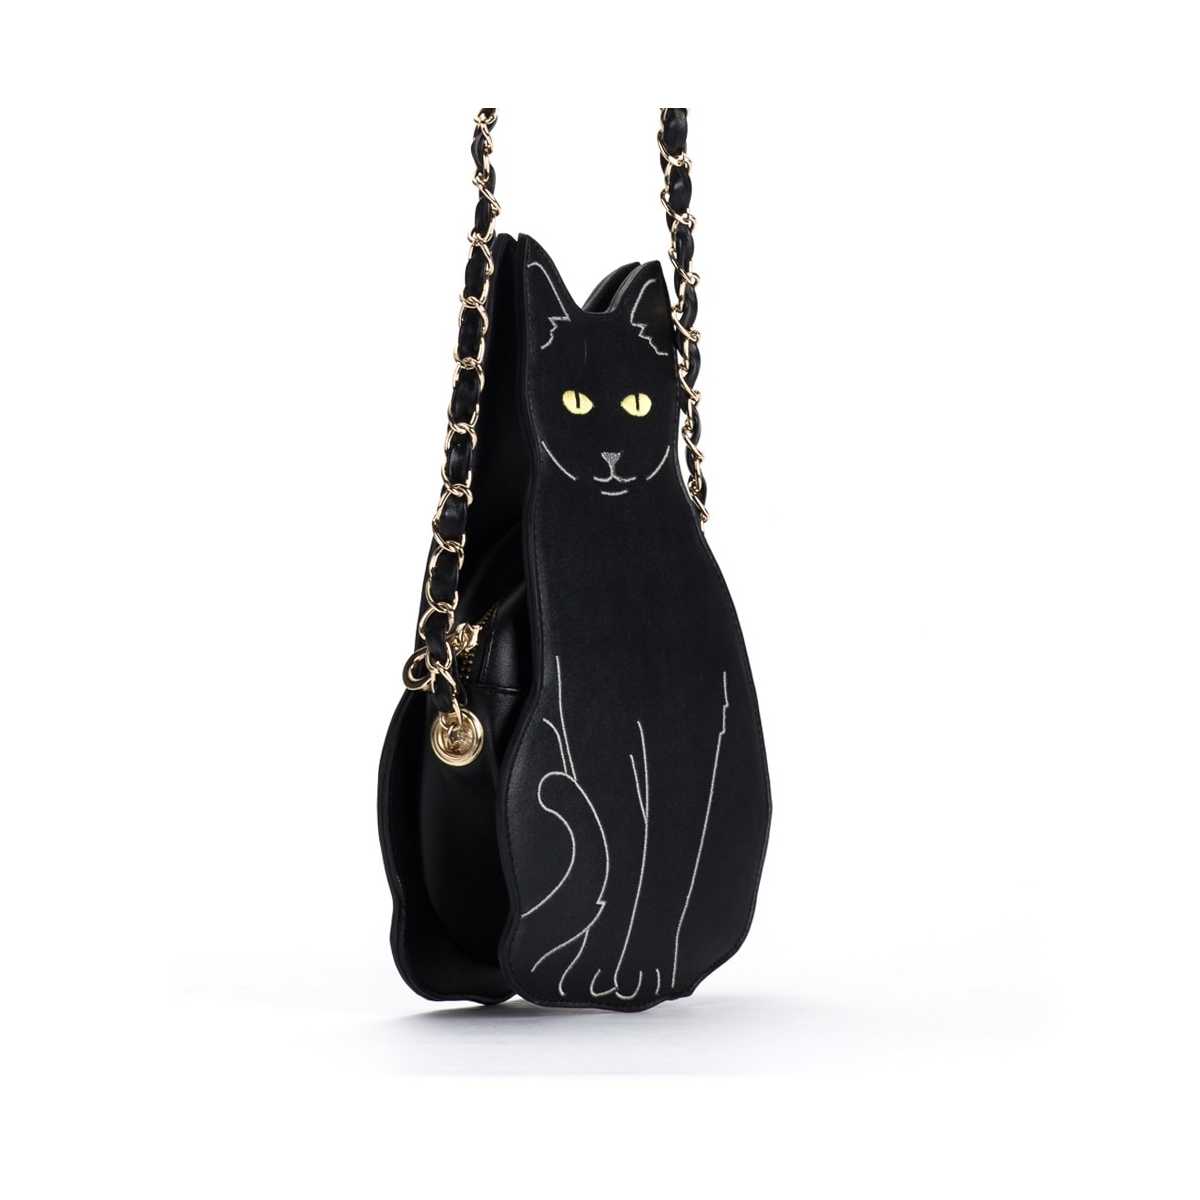 Black Cat Chain Shoulder Bag in PU Leather CatsPlay Superstore